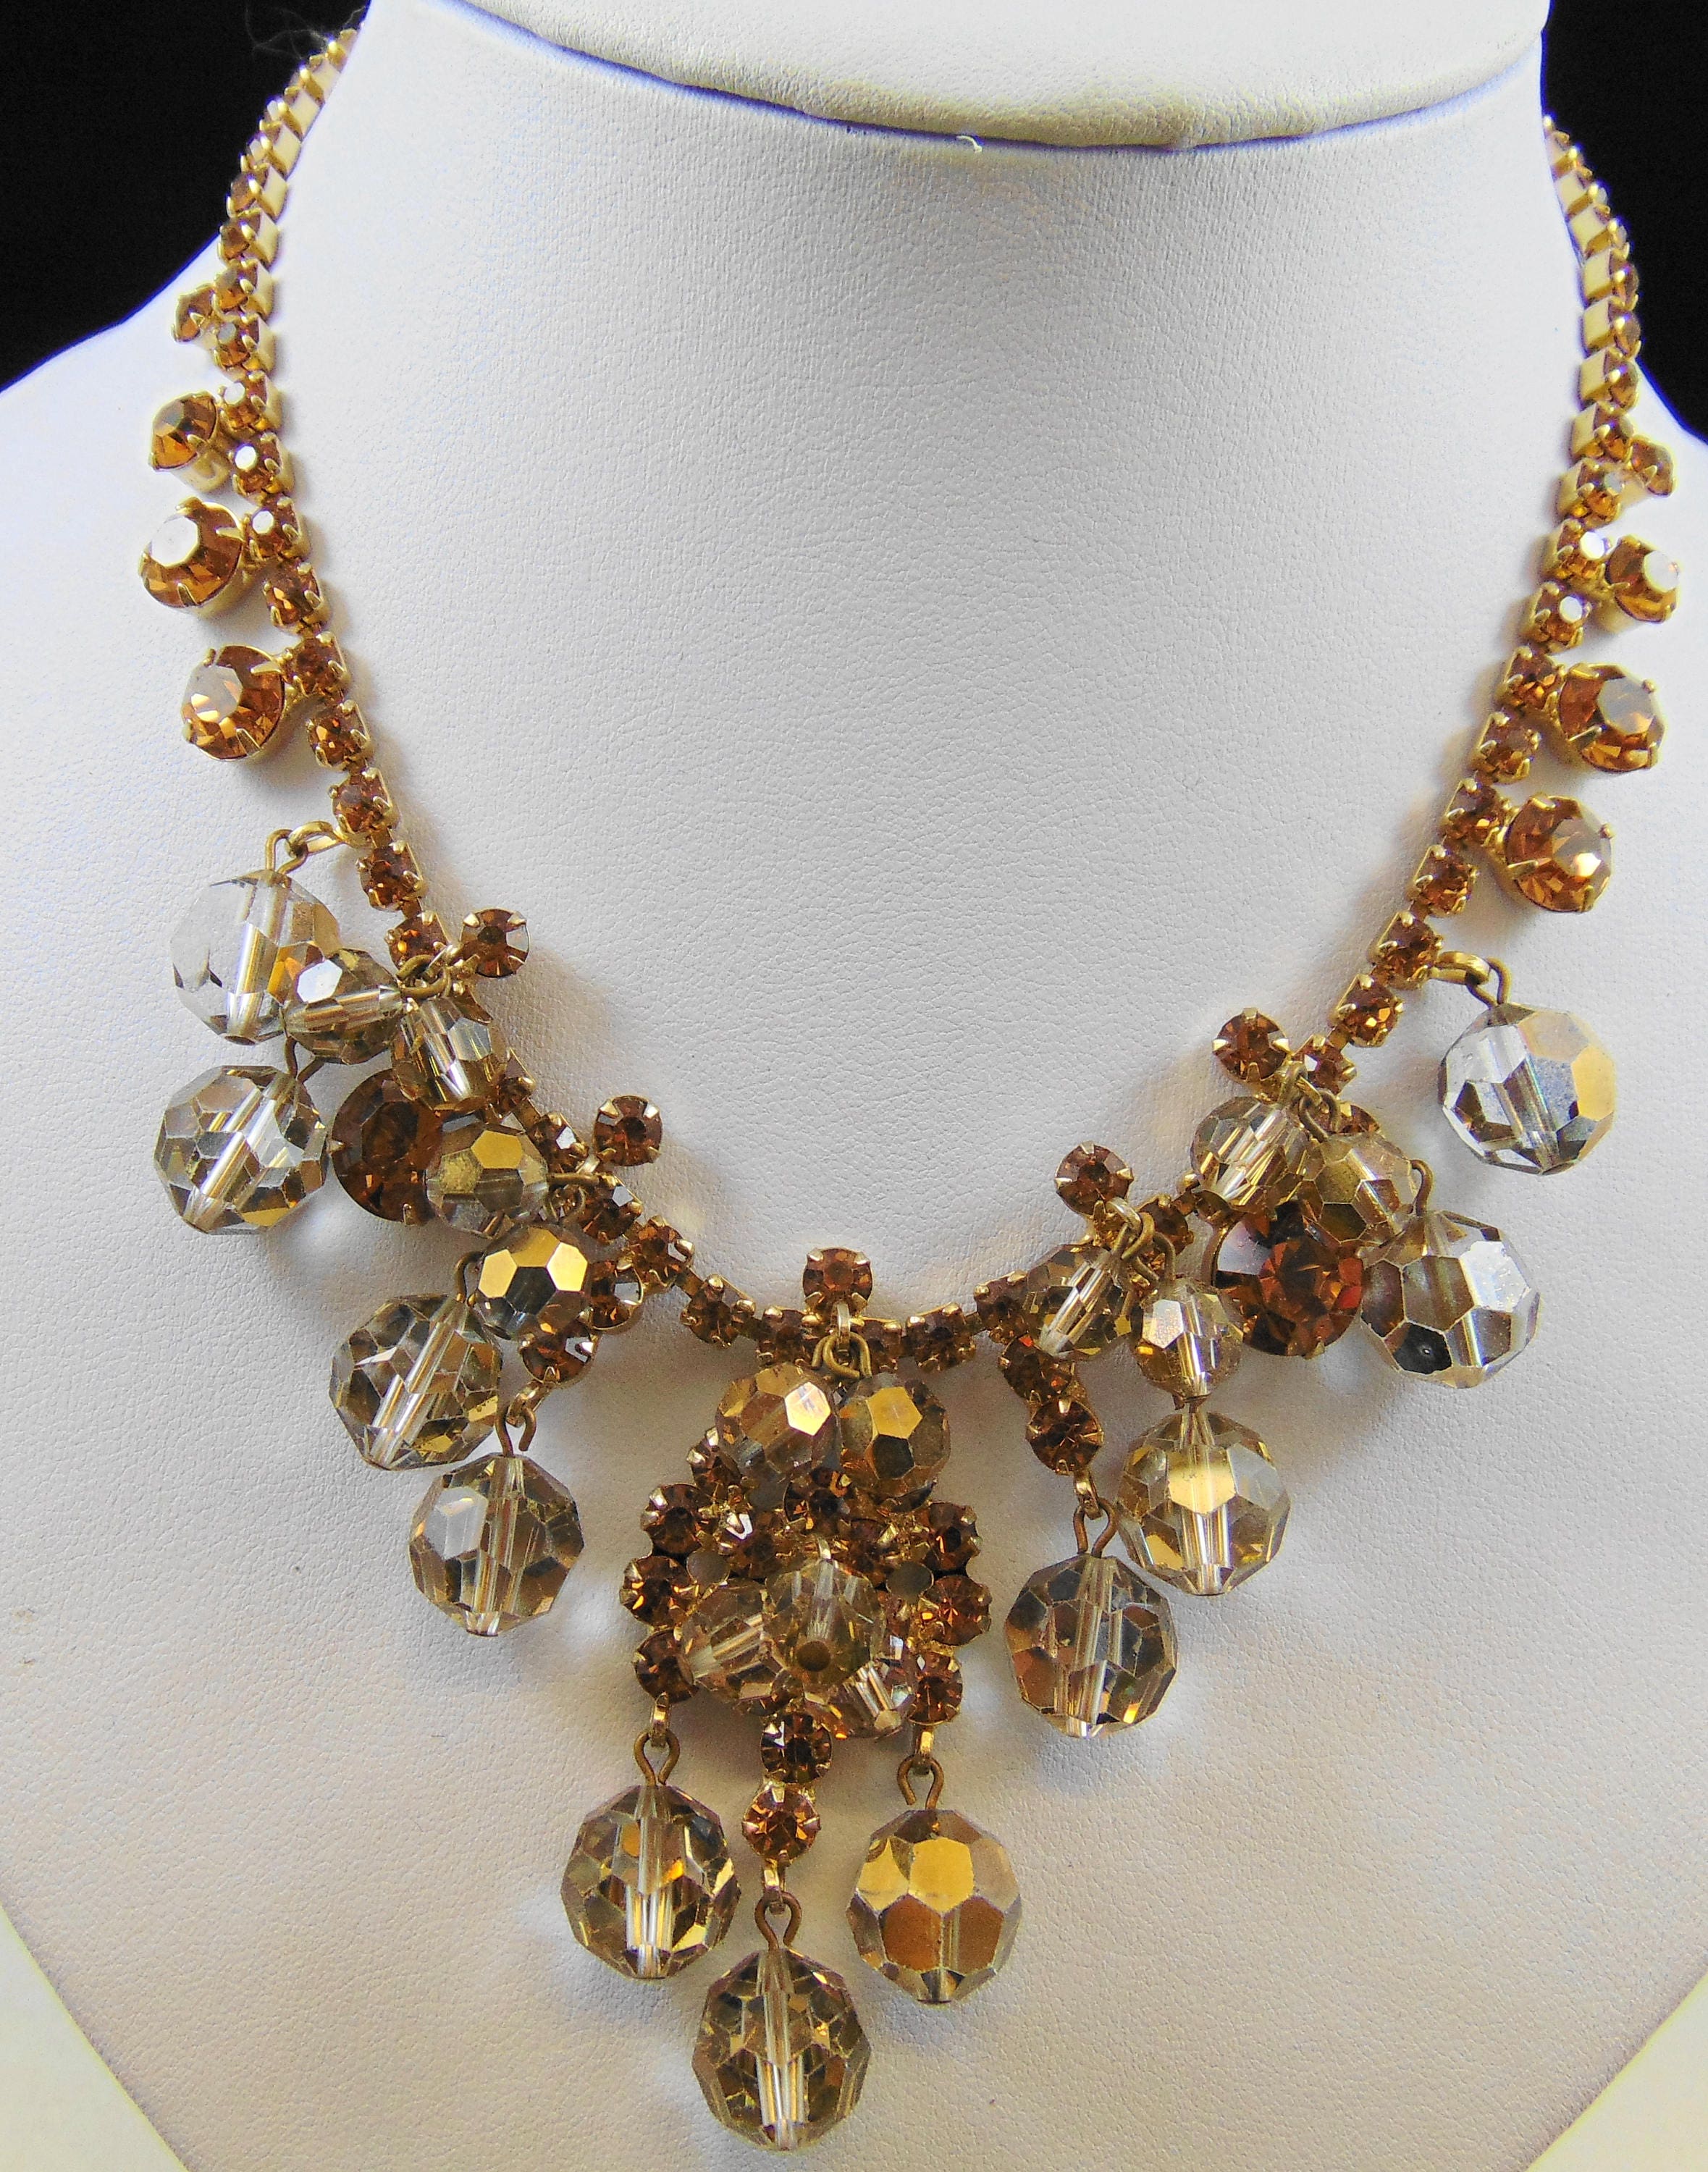 Double Line Spinels Chanel Necklace, Doralia, Jewelry by Artisans